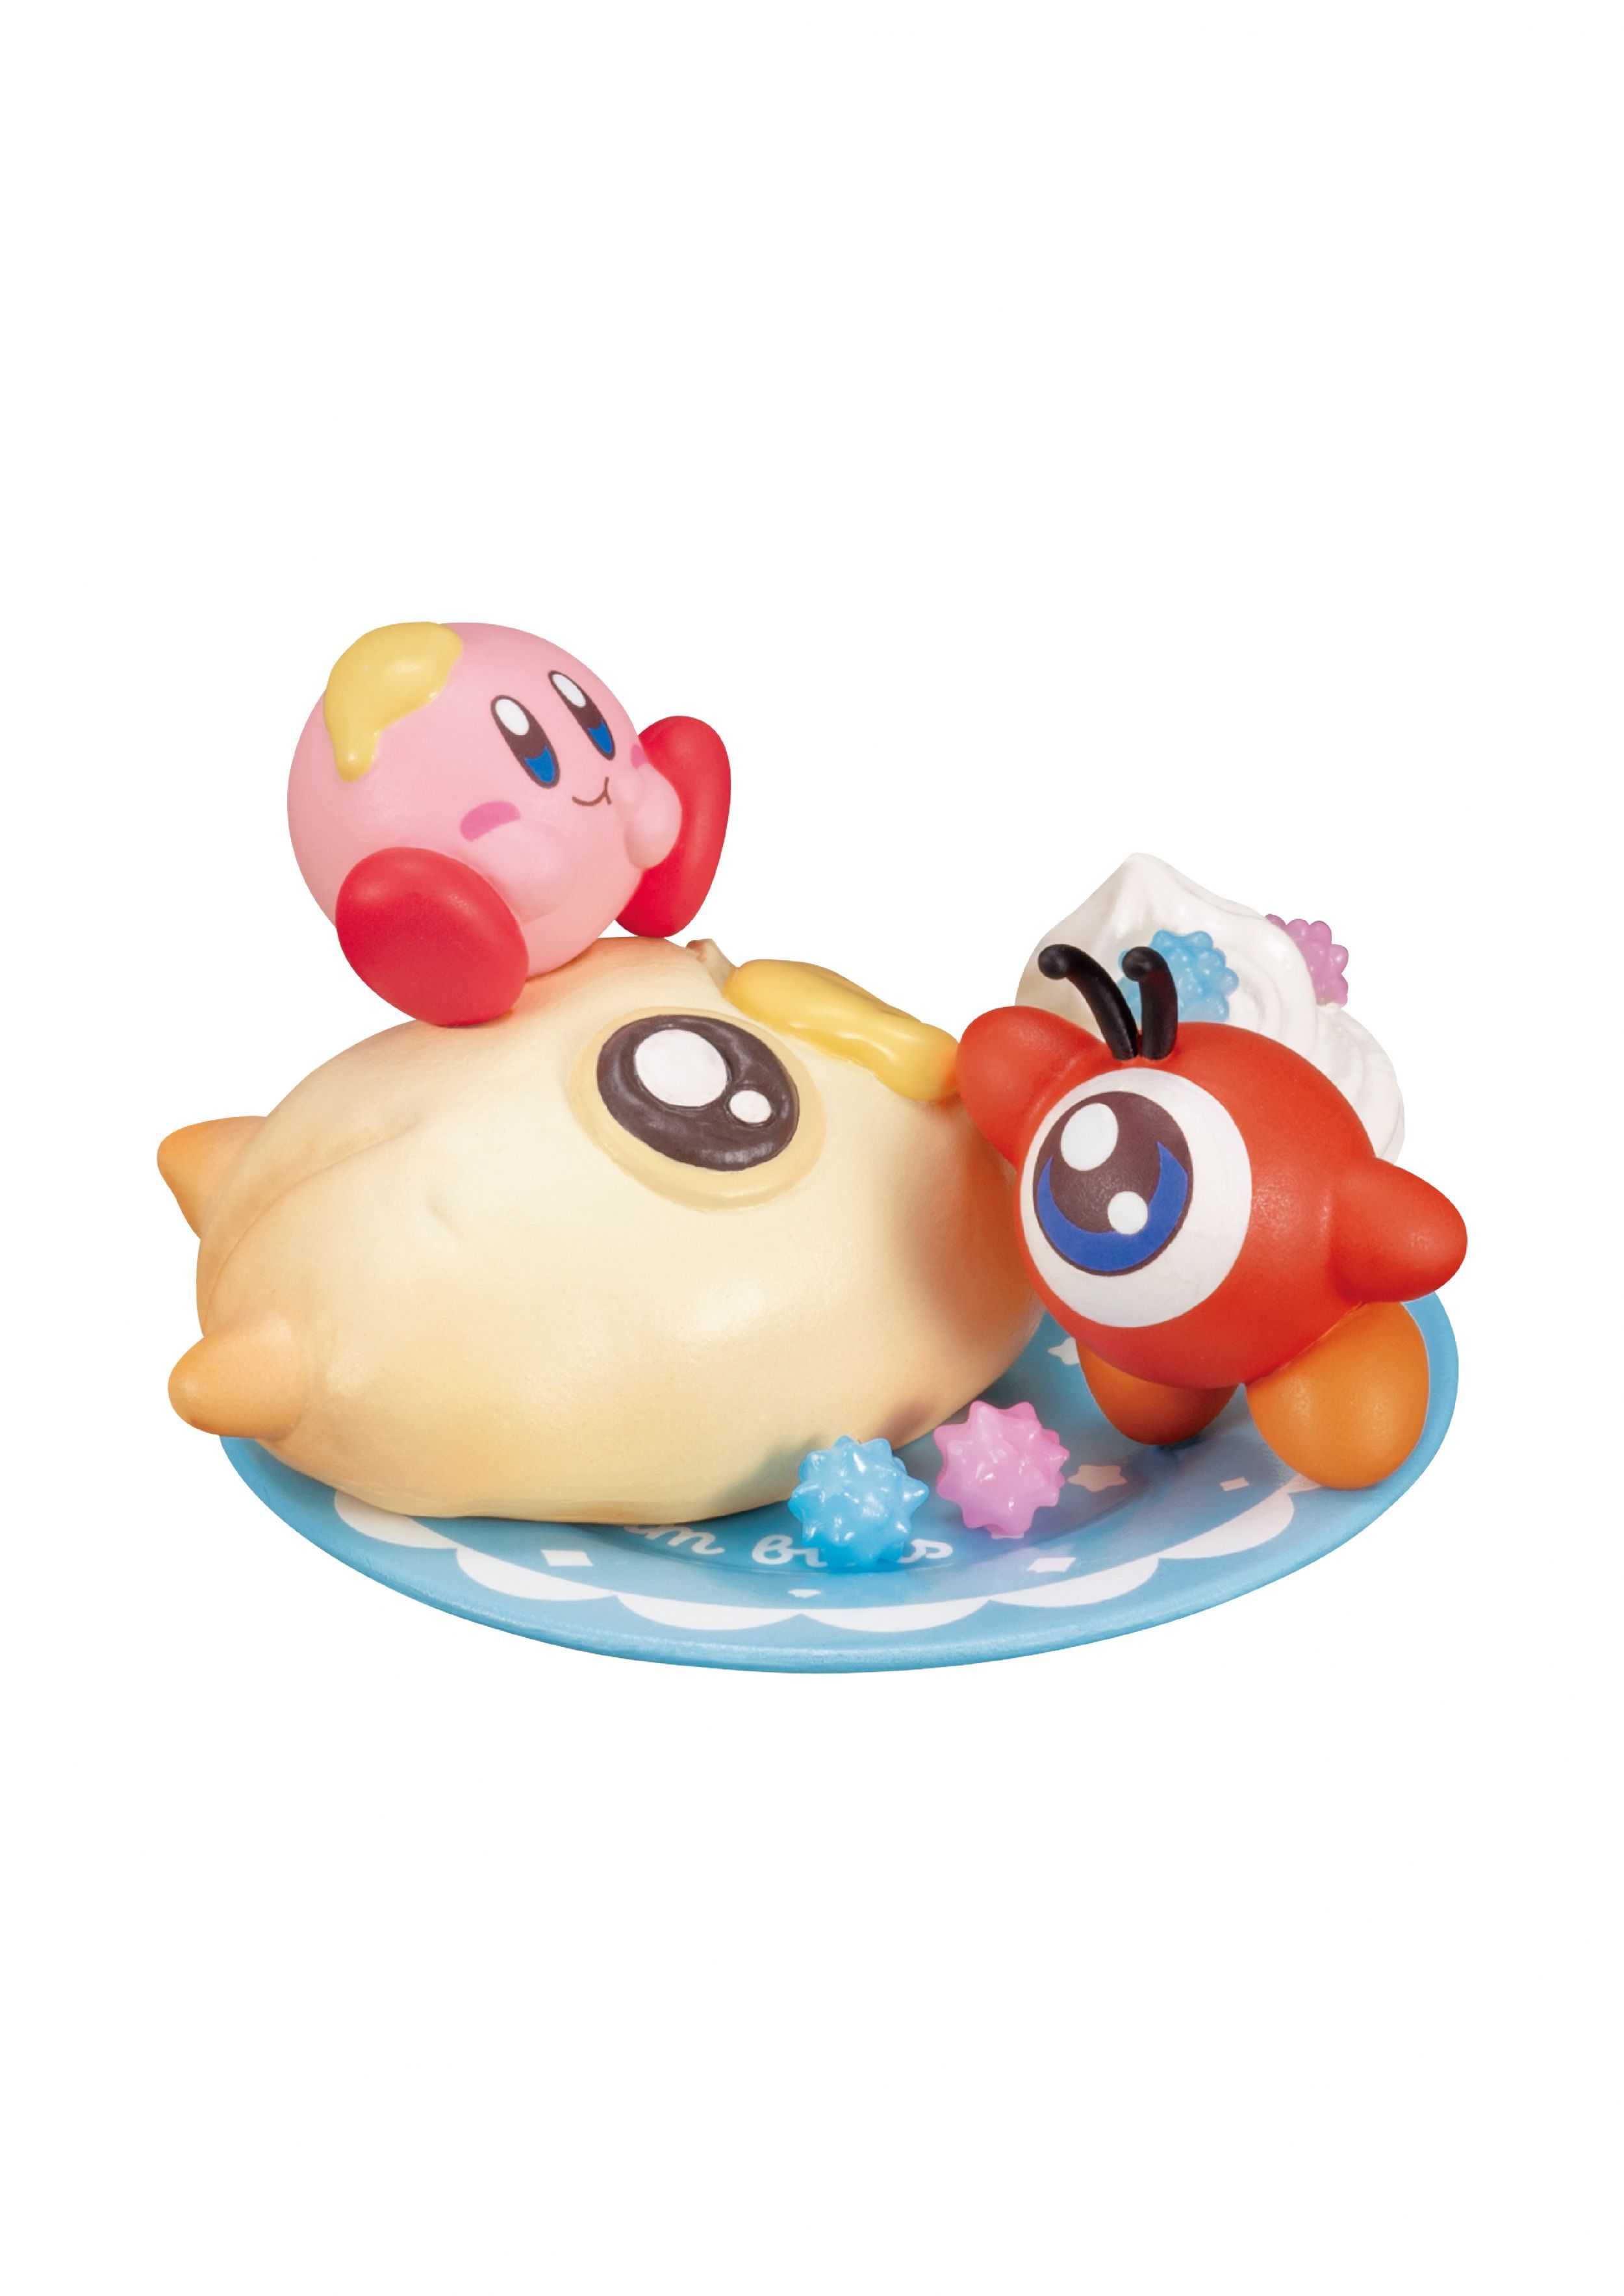 Kirby - Bakery Cafe Blind image count 4